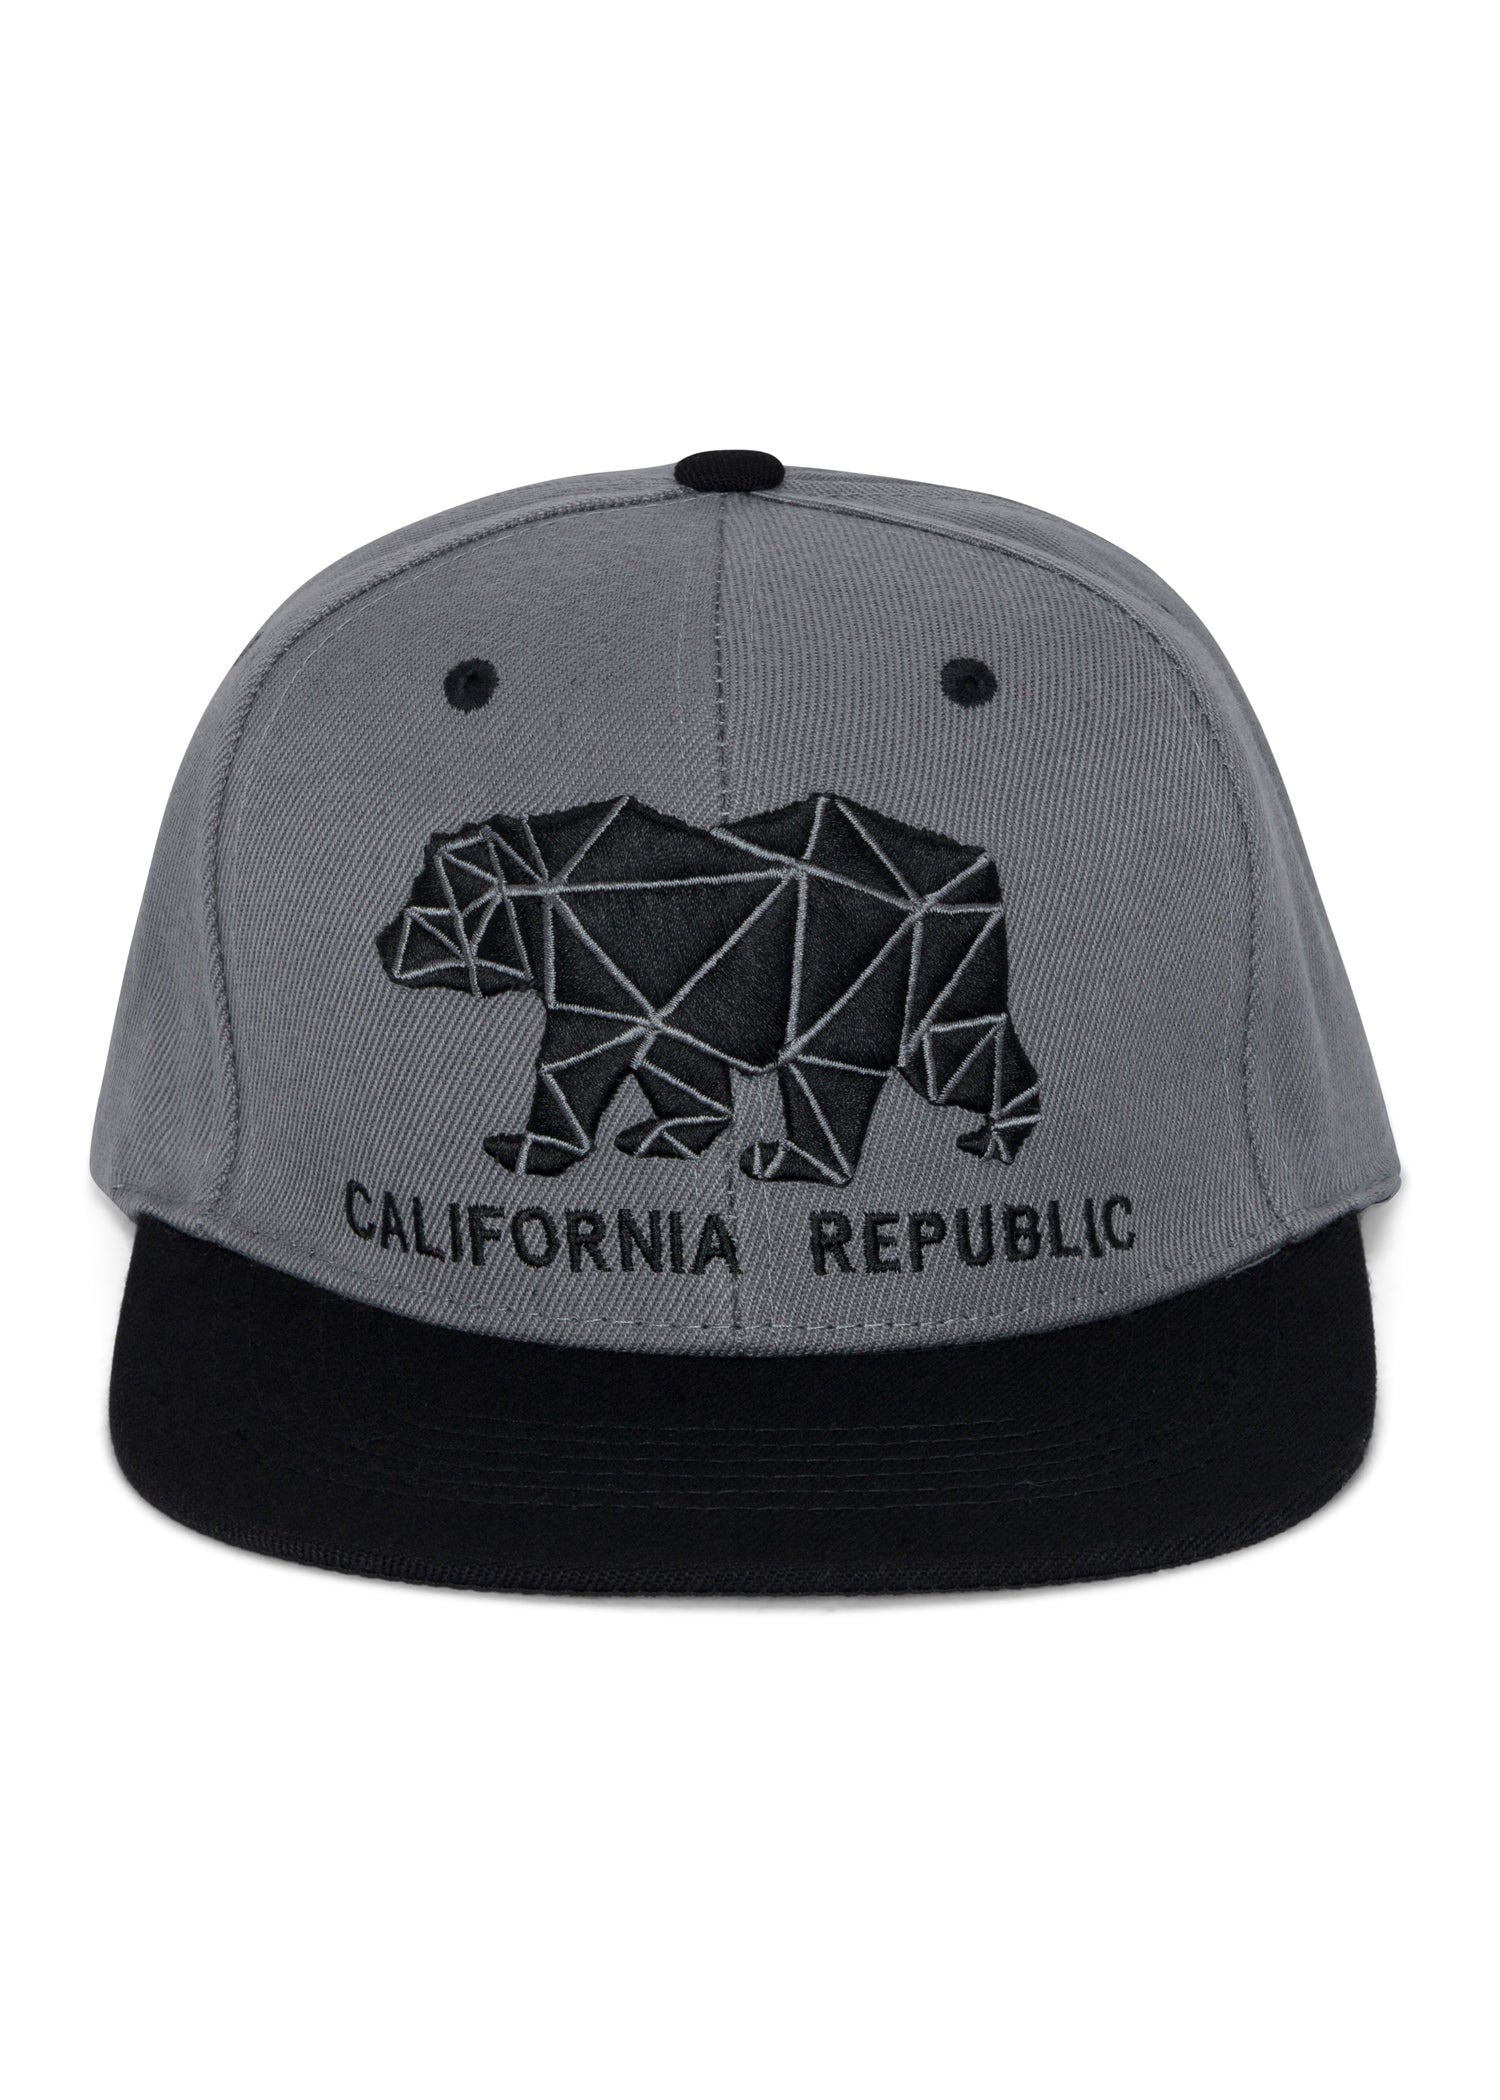 Front view of the Men’s Geo Bear Snapback by Ring of Fire Clothing in Black Grey color, showcasing the geometric bear design inspired by the California flag.